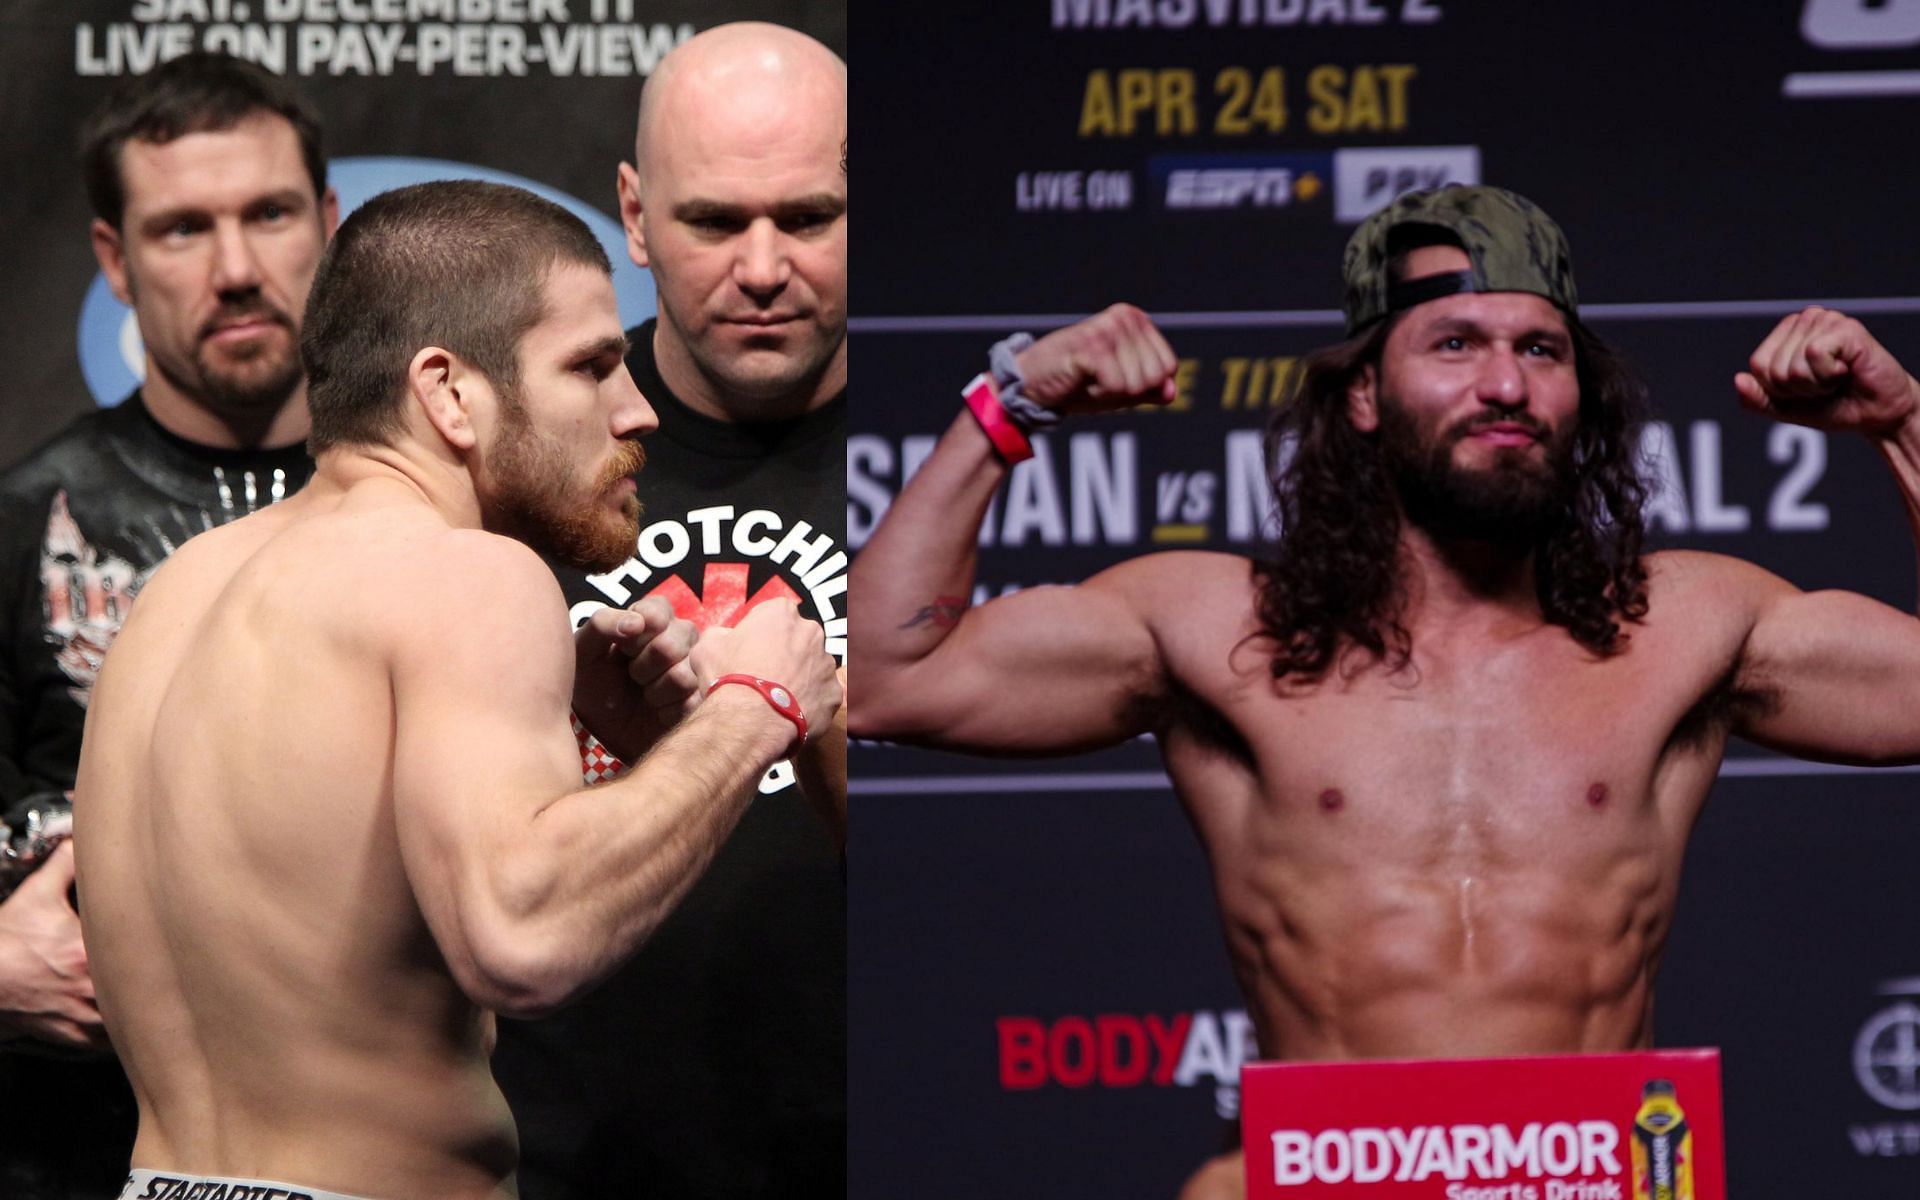 Jorge Masvidal and Jim Miller are tied at the eighth position for the most experienced MMA fighters in the UFC